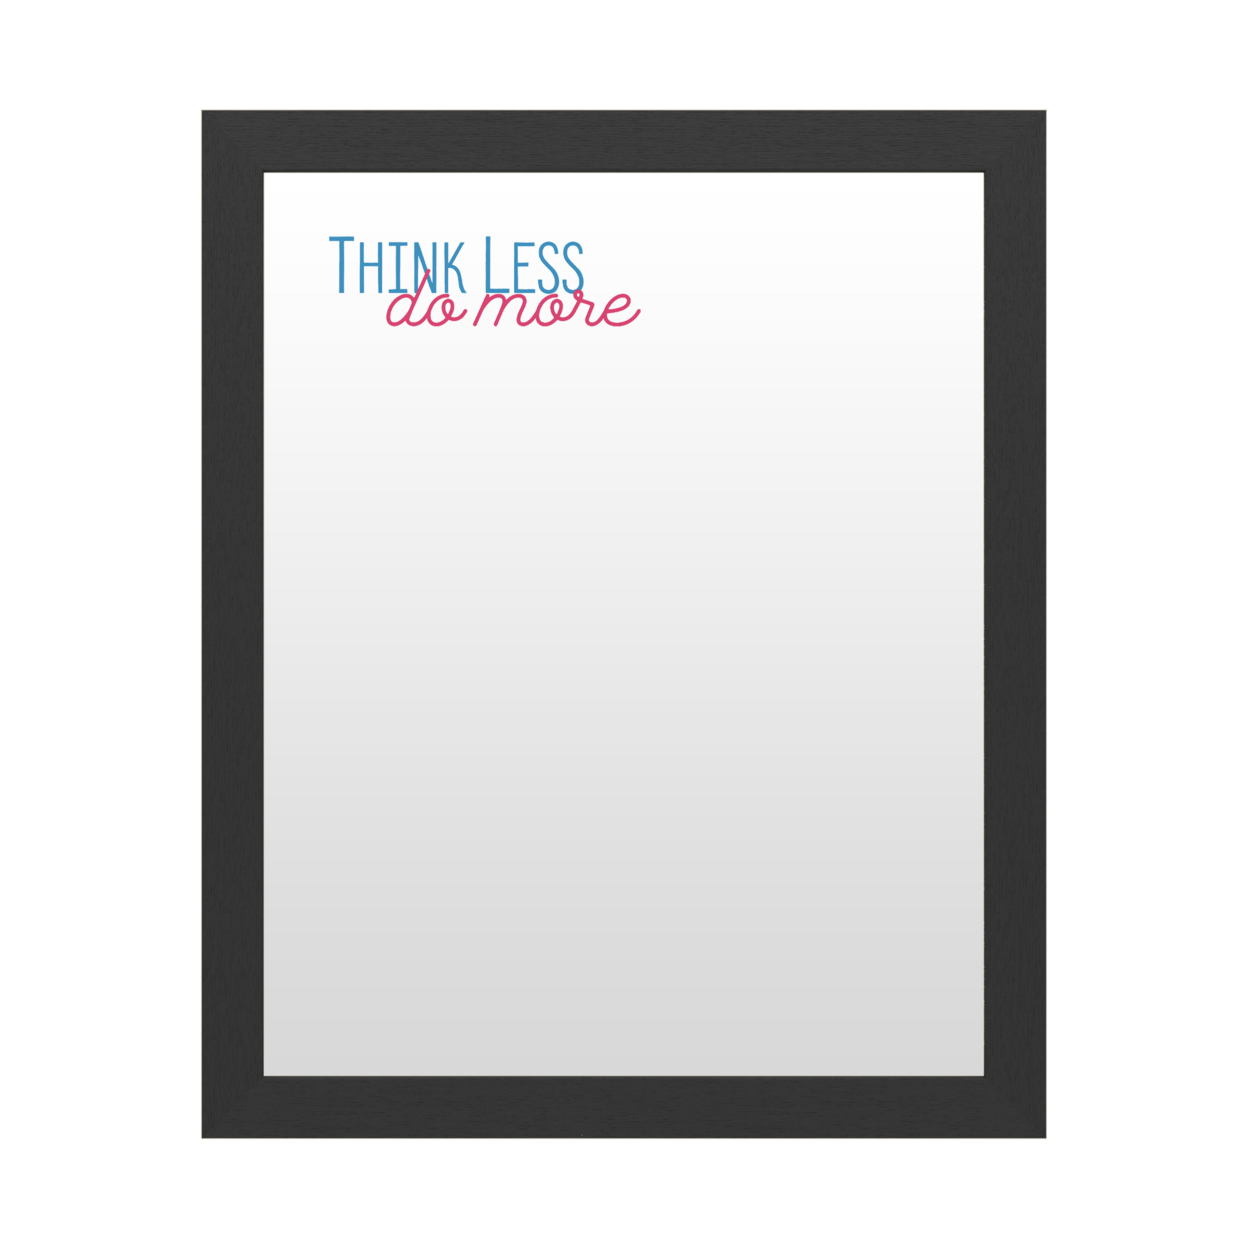 Dry Erase 16 X 20 Marker Board With Printed Artwork - Think Less Do More 2 White Board - Ready To Hang